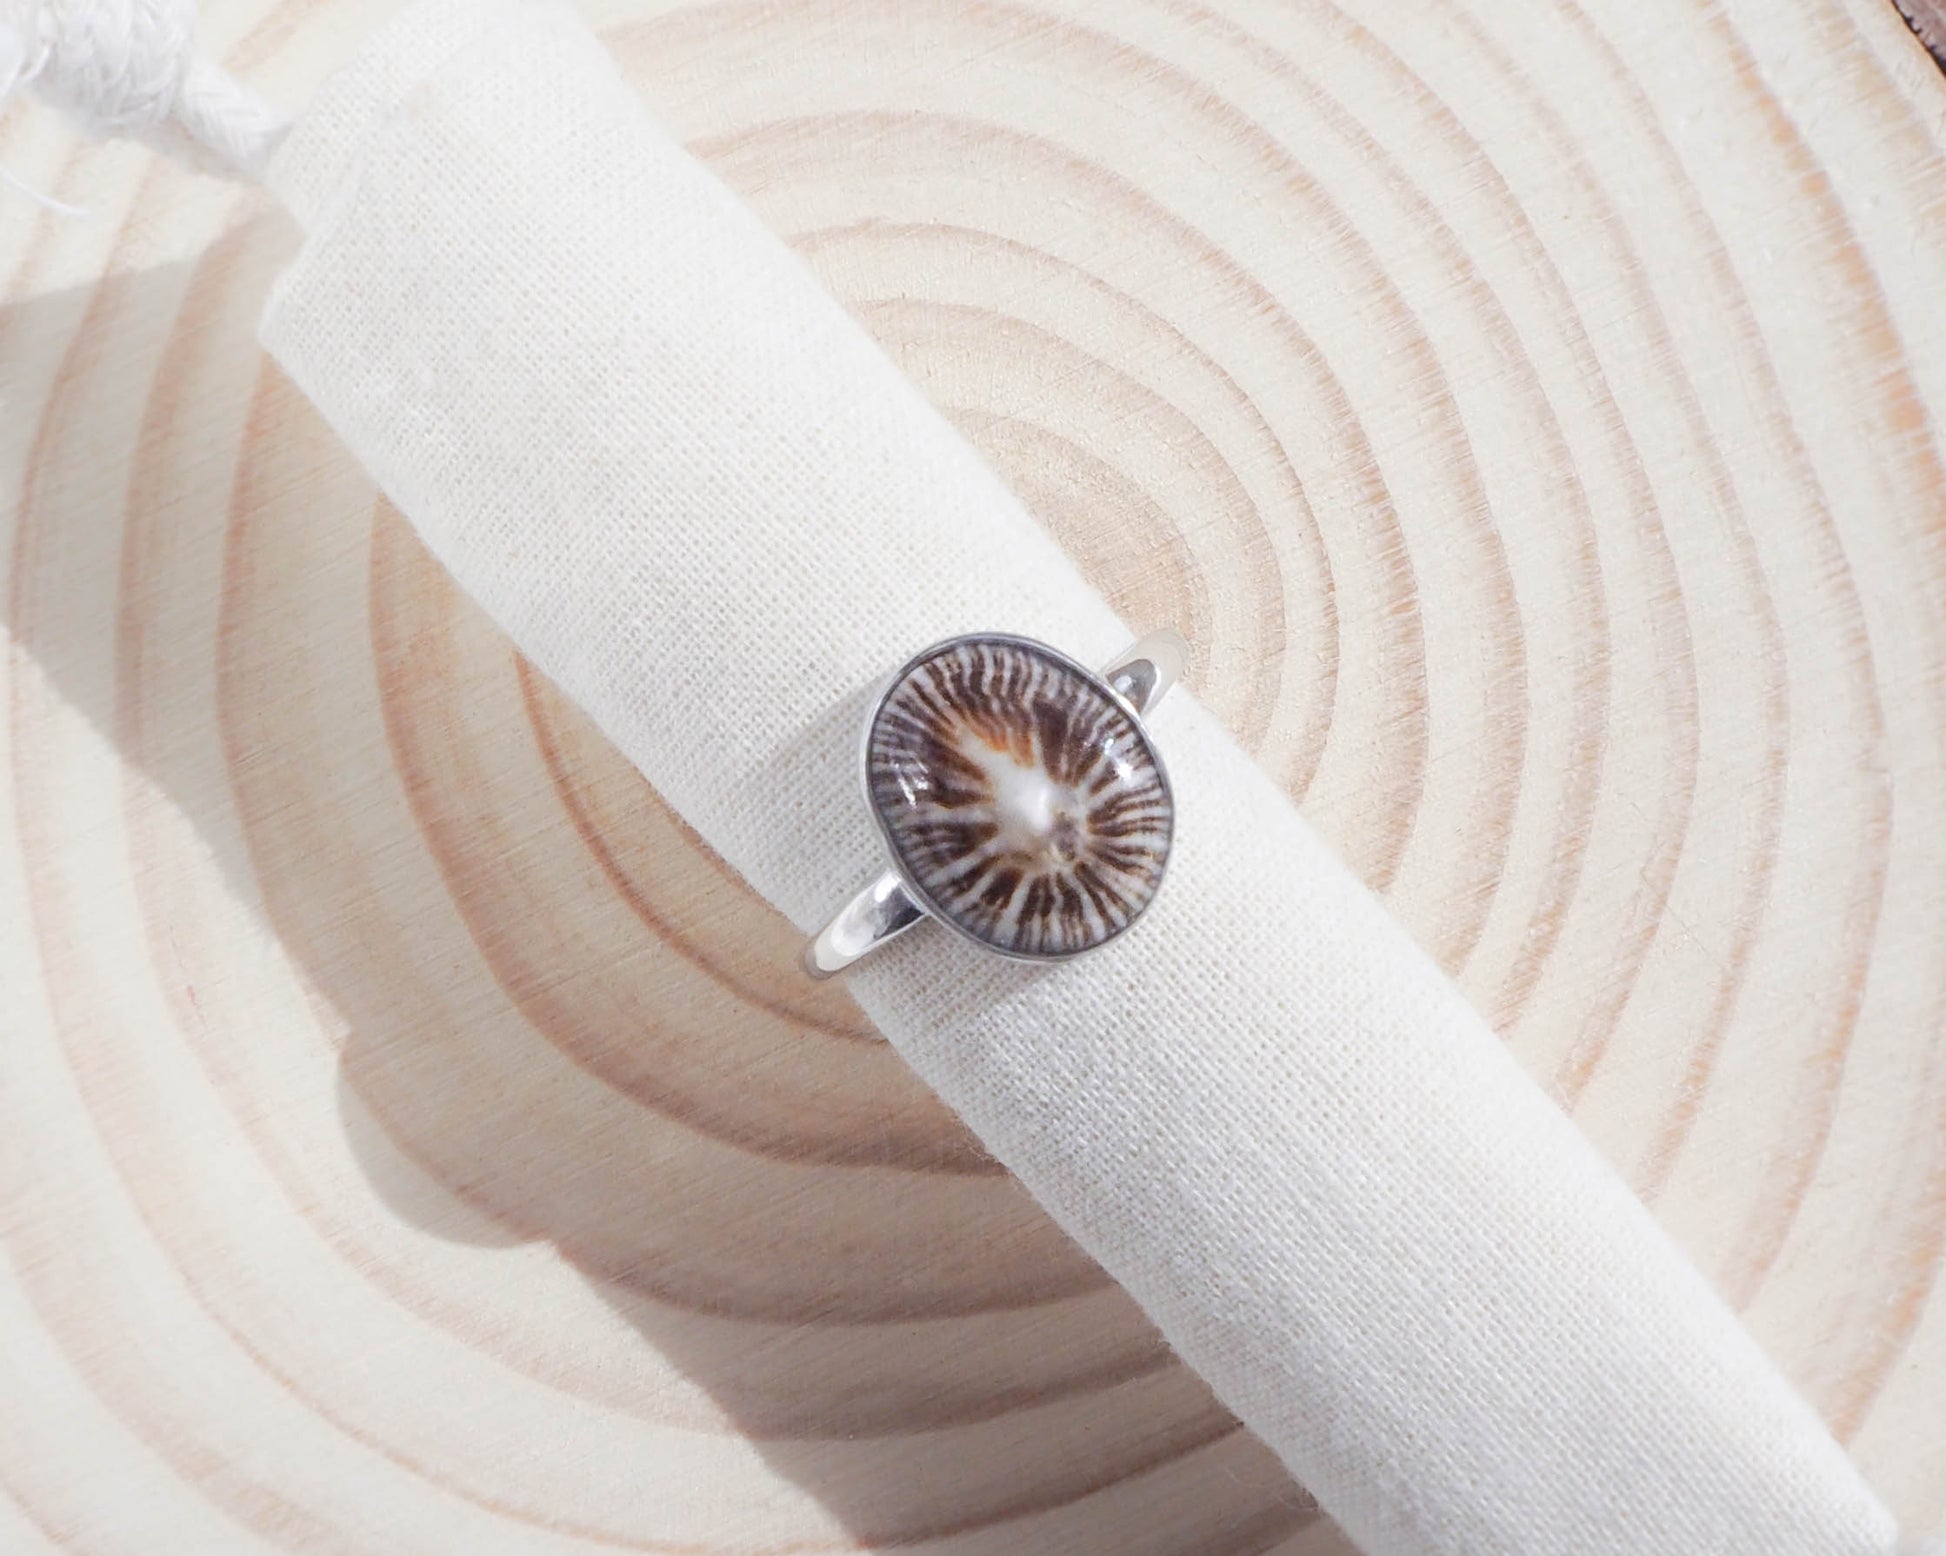 925 Silver Ring from Portugal, Limpet Shell, Algarve, Sea by lou,925 Silver Jewelry, Portugal Souvenir, Beach Wedding Accessory